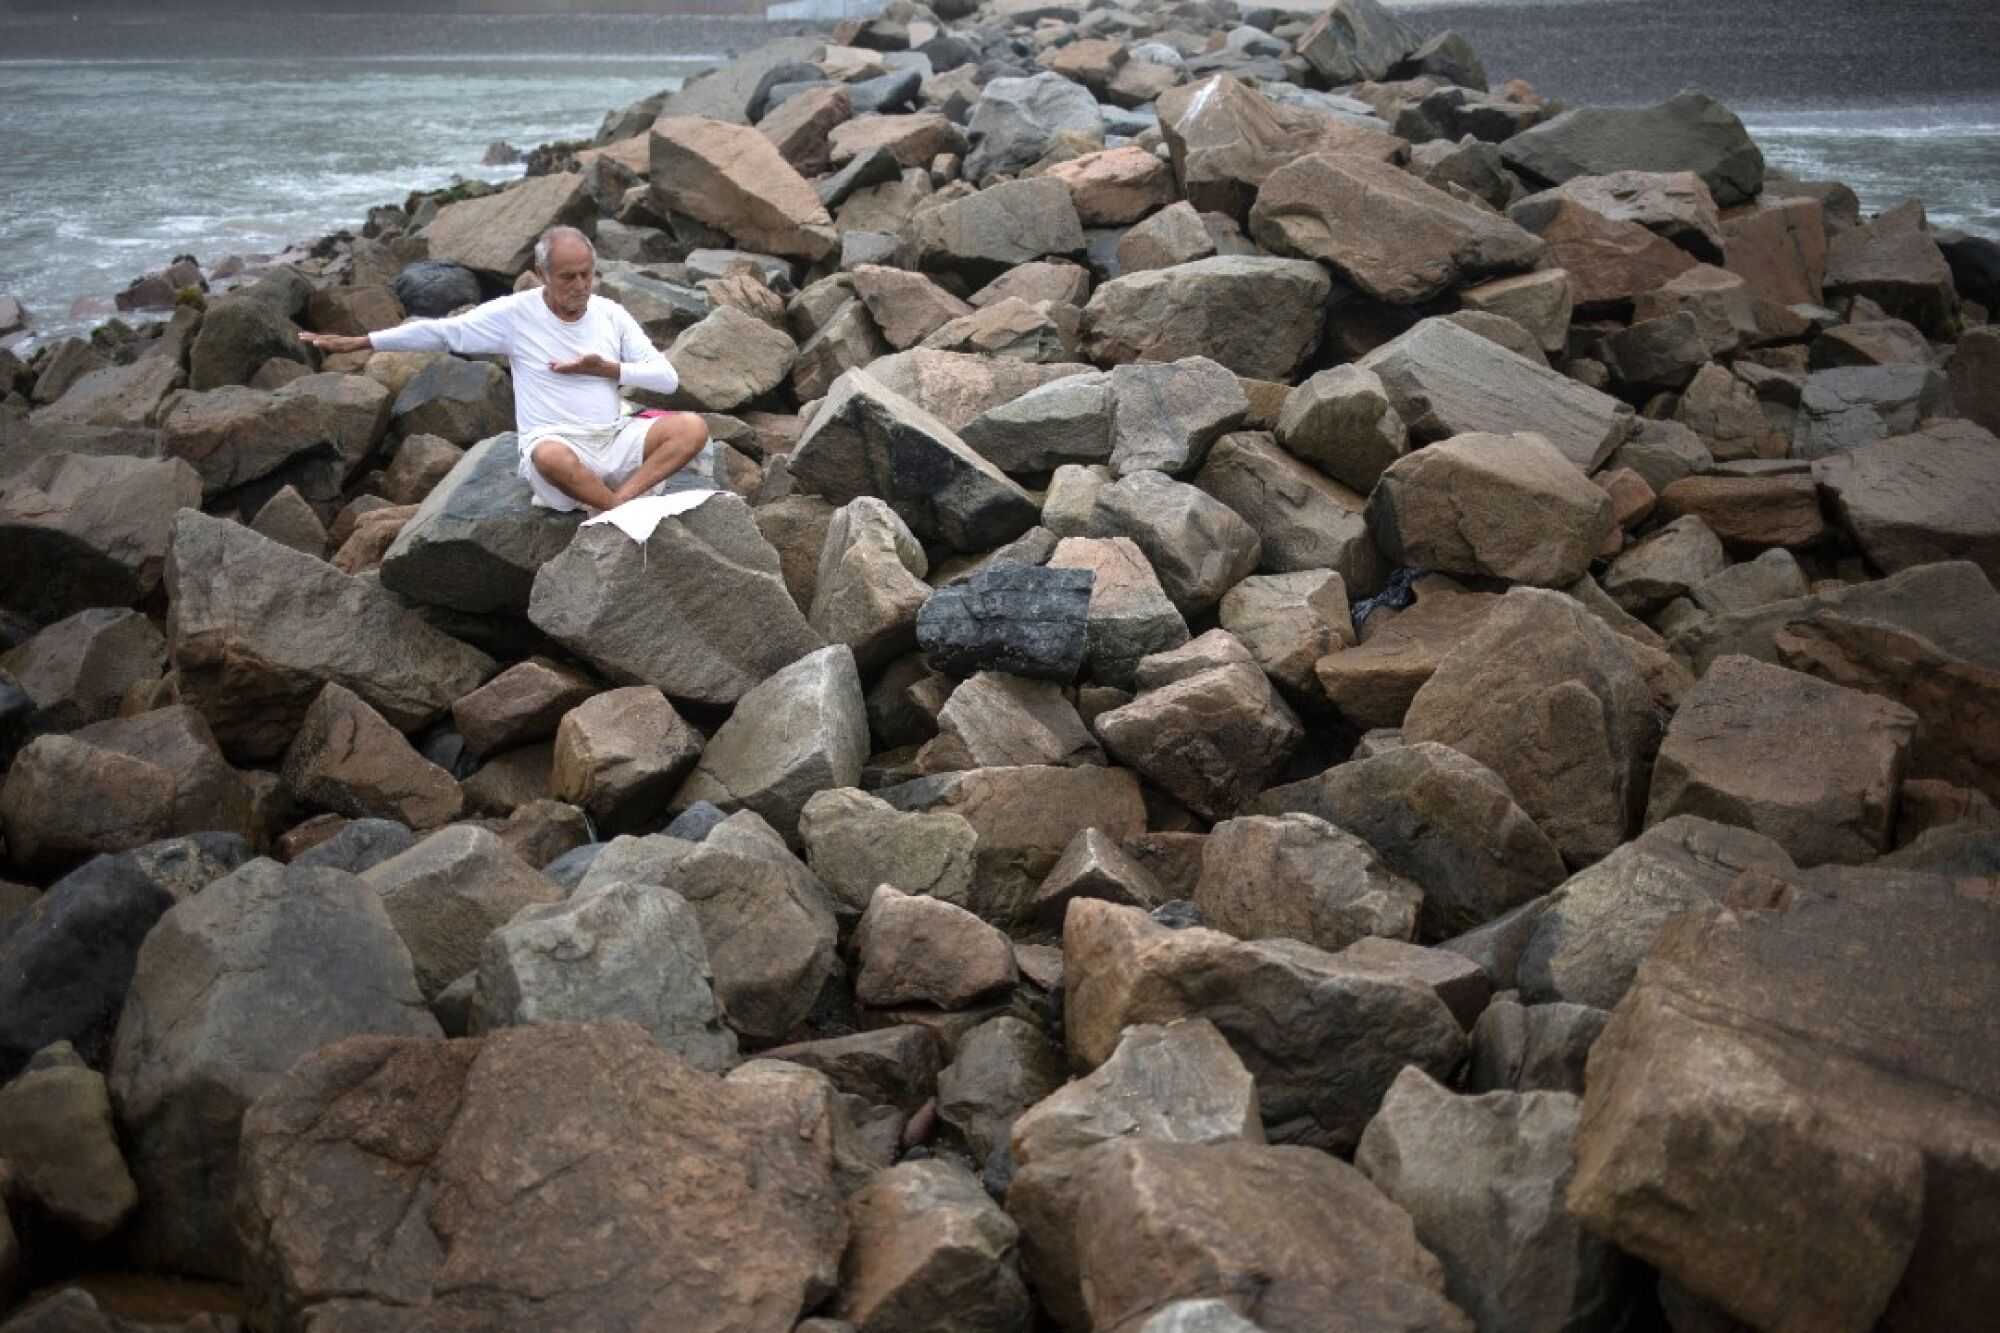 Tomas Cabrera, 86, meditates on a jetty at Agua Dulce beach on March 25, in defiance of government orders to stay away.